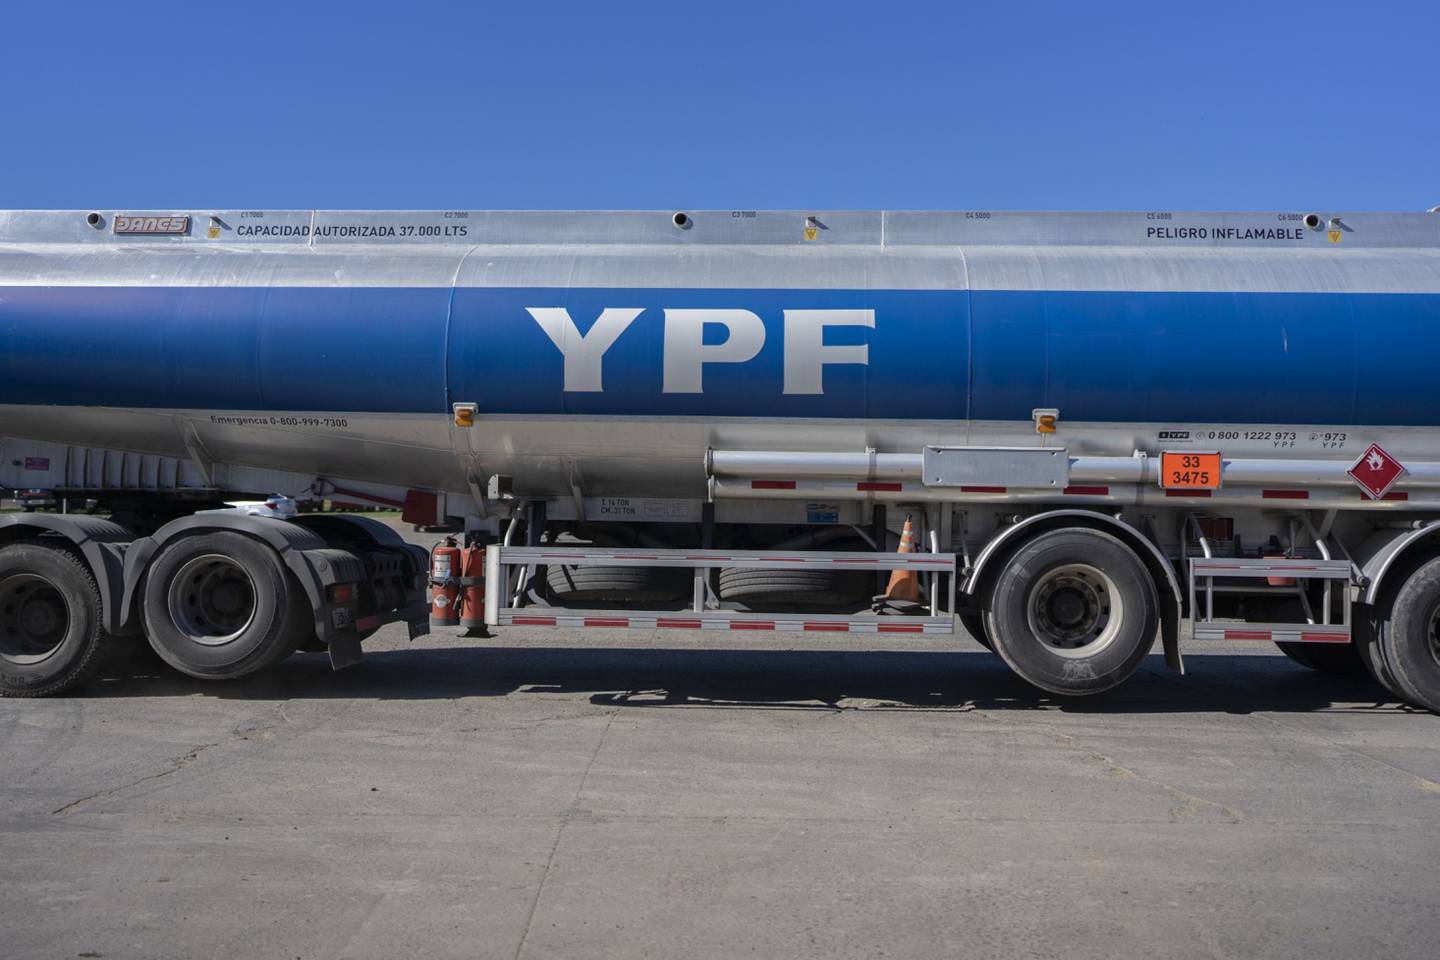 A YPF tanker truck during a protest amid diesel shortages near Puerto General San Martin, Argentina, on Tuesday, April 12, 2022. Just 1,170 trucks were lined up to enter ports on Monday, when the daily average last week was closer to 6,000.